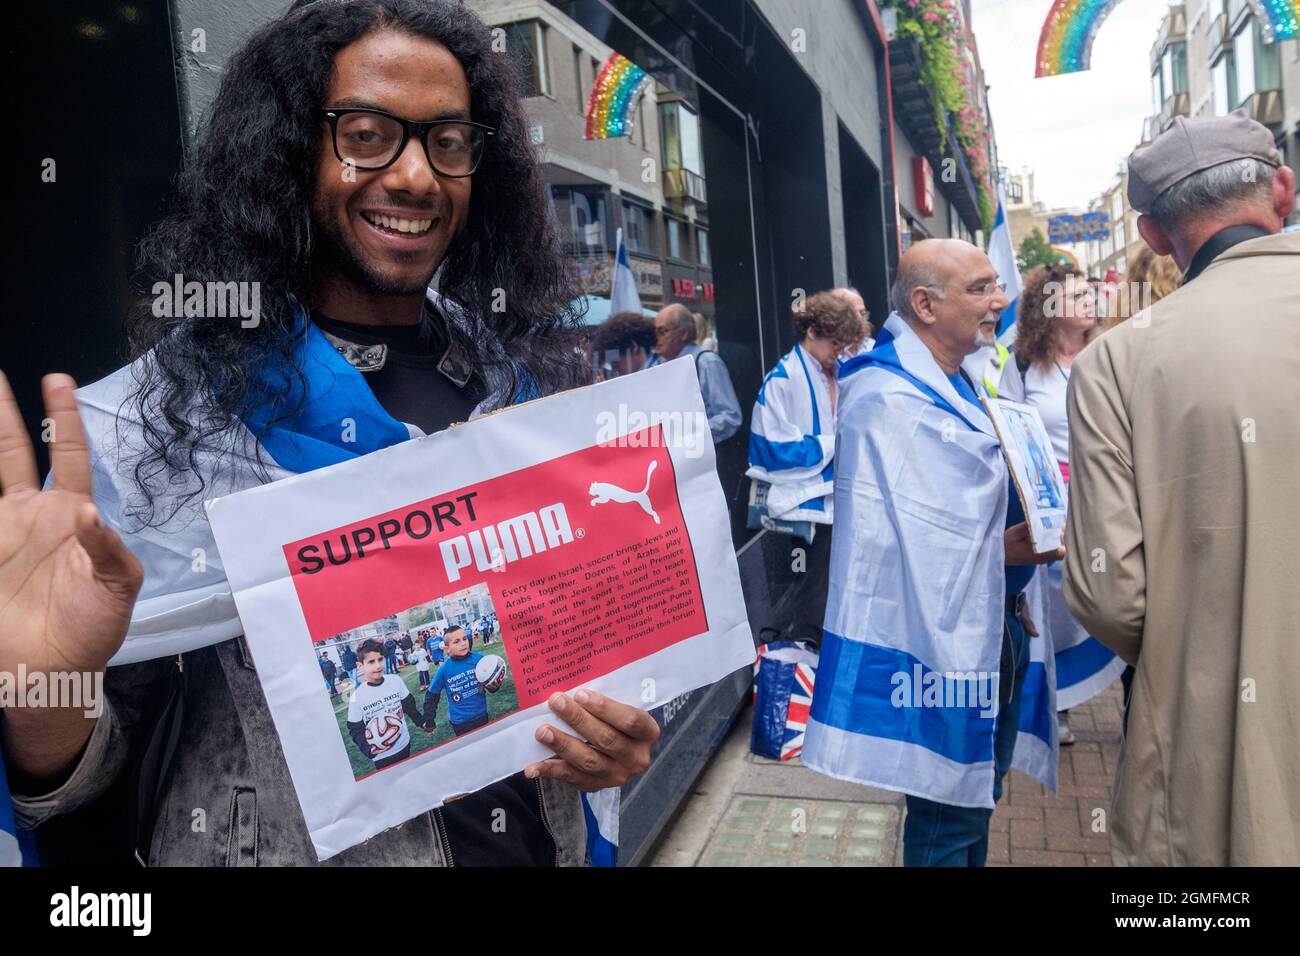 London, UK. 18 Sept 2021. A man holds a poster supporting Puma which says football brings Jews and Arabs together. Palestinian football clubs urge people to support the boycott of Puma and the #BoycottPUMA Global Day of Action. They call on Puma to end its sponsorship of the Israel Football Association, which governs teams in illegal Israeli settlements in the occupied Palestinian West Bank Peter Marshall/Alamy Live News Stock Photo